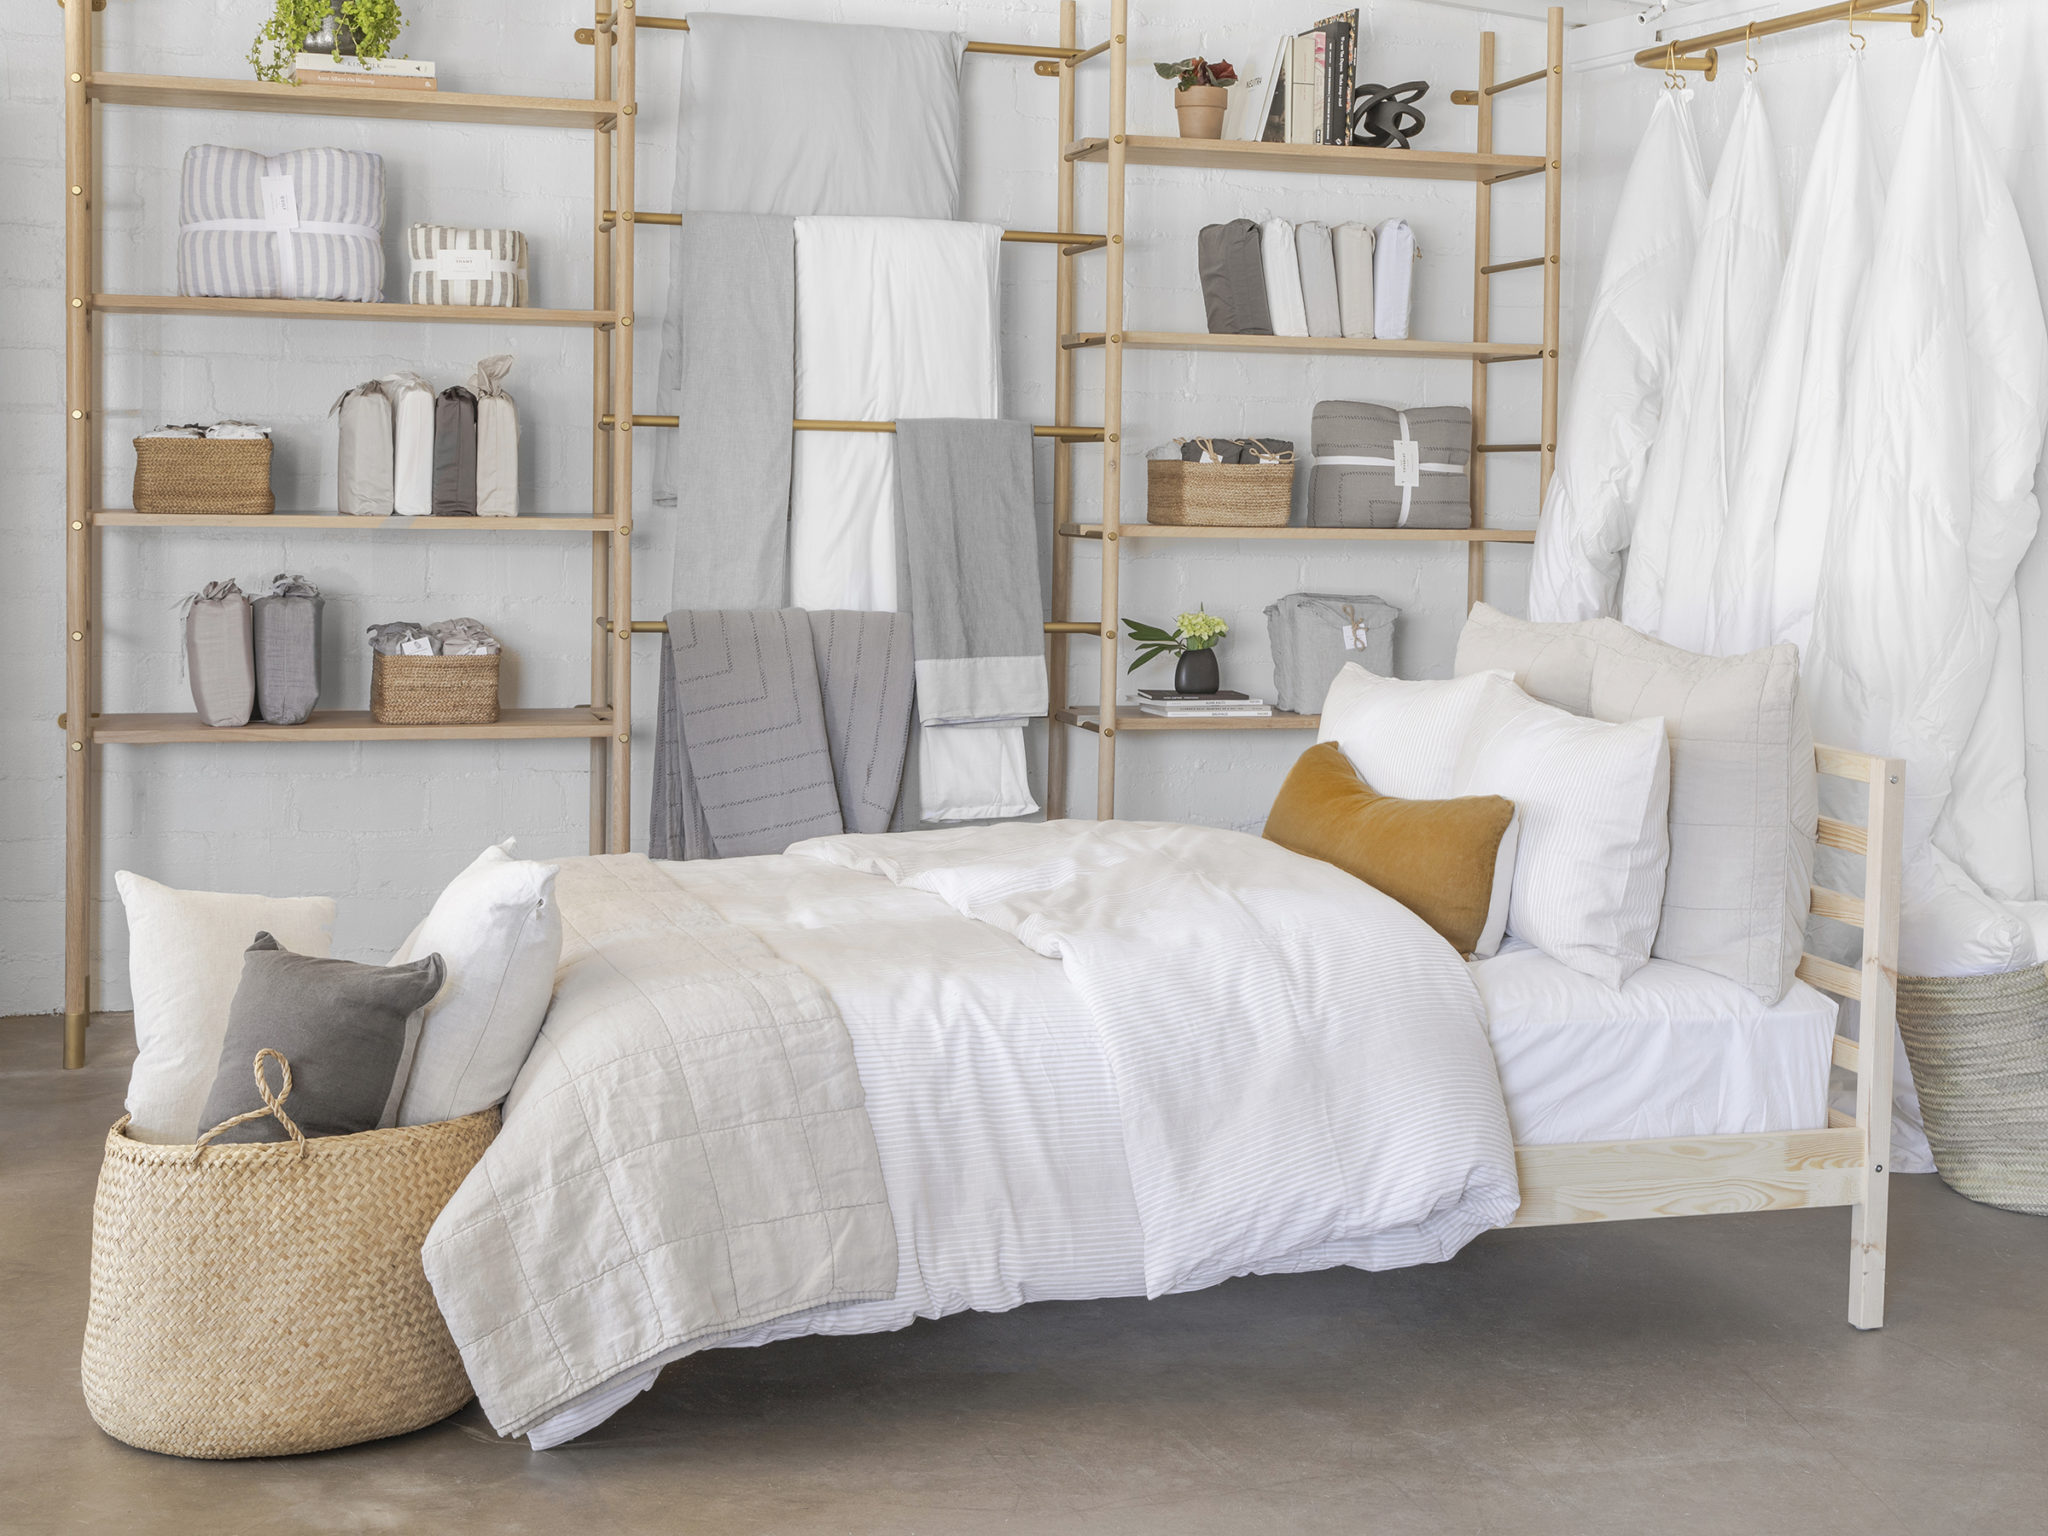 Home Goods Brand Parachute Is Opening Its First DC Store on 14th Street